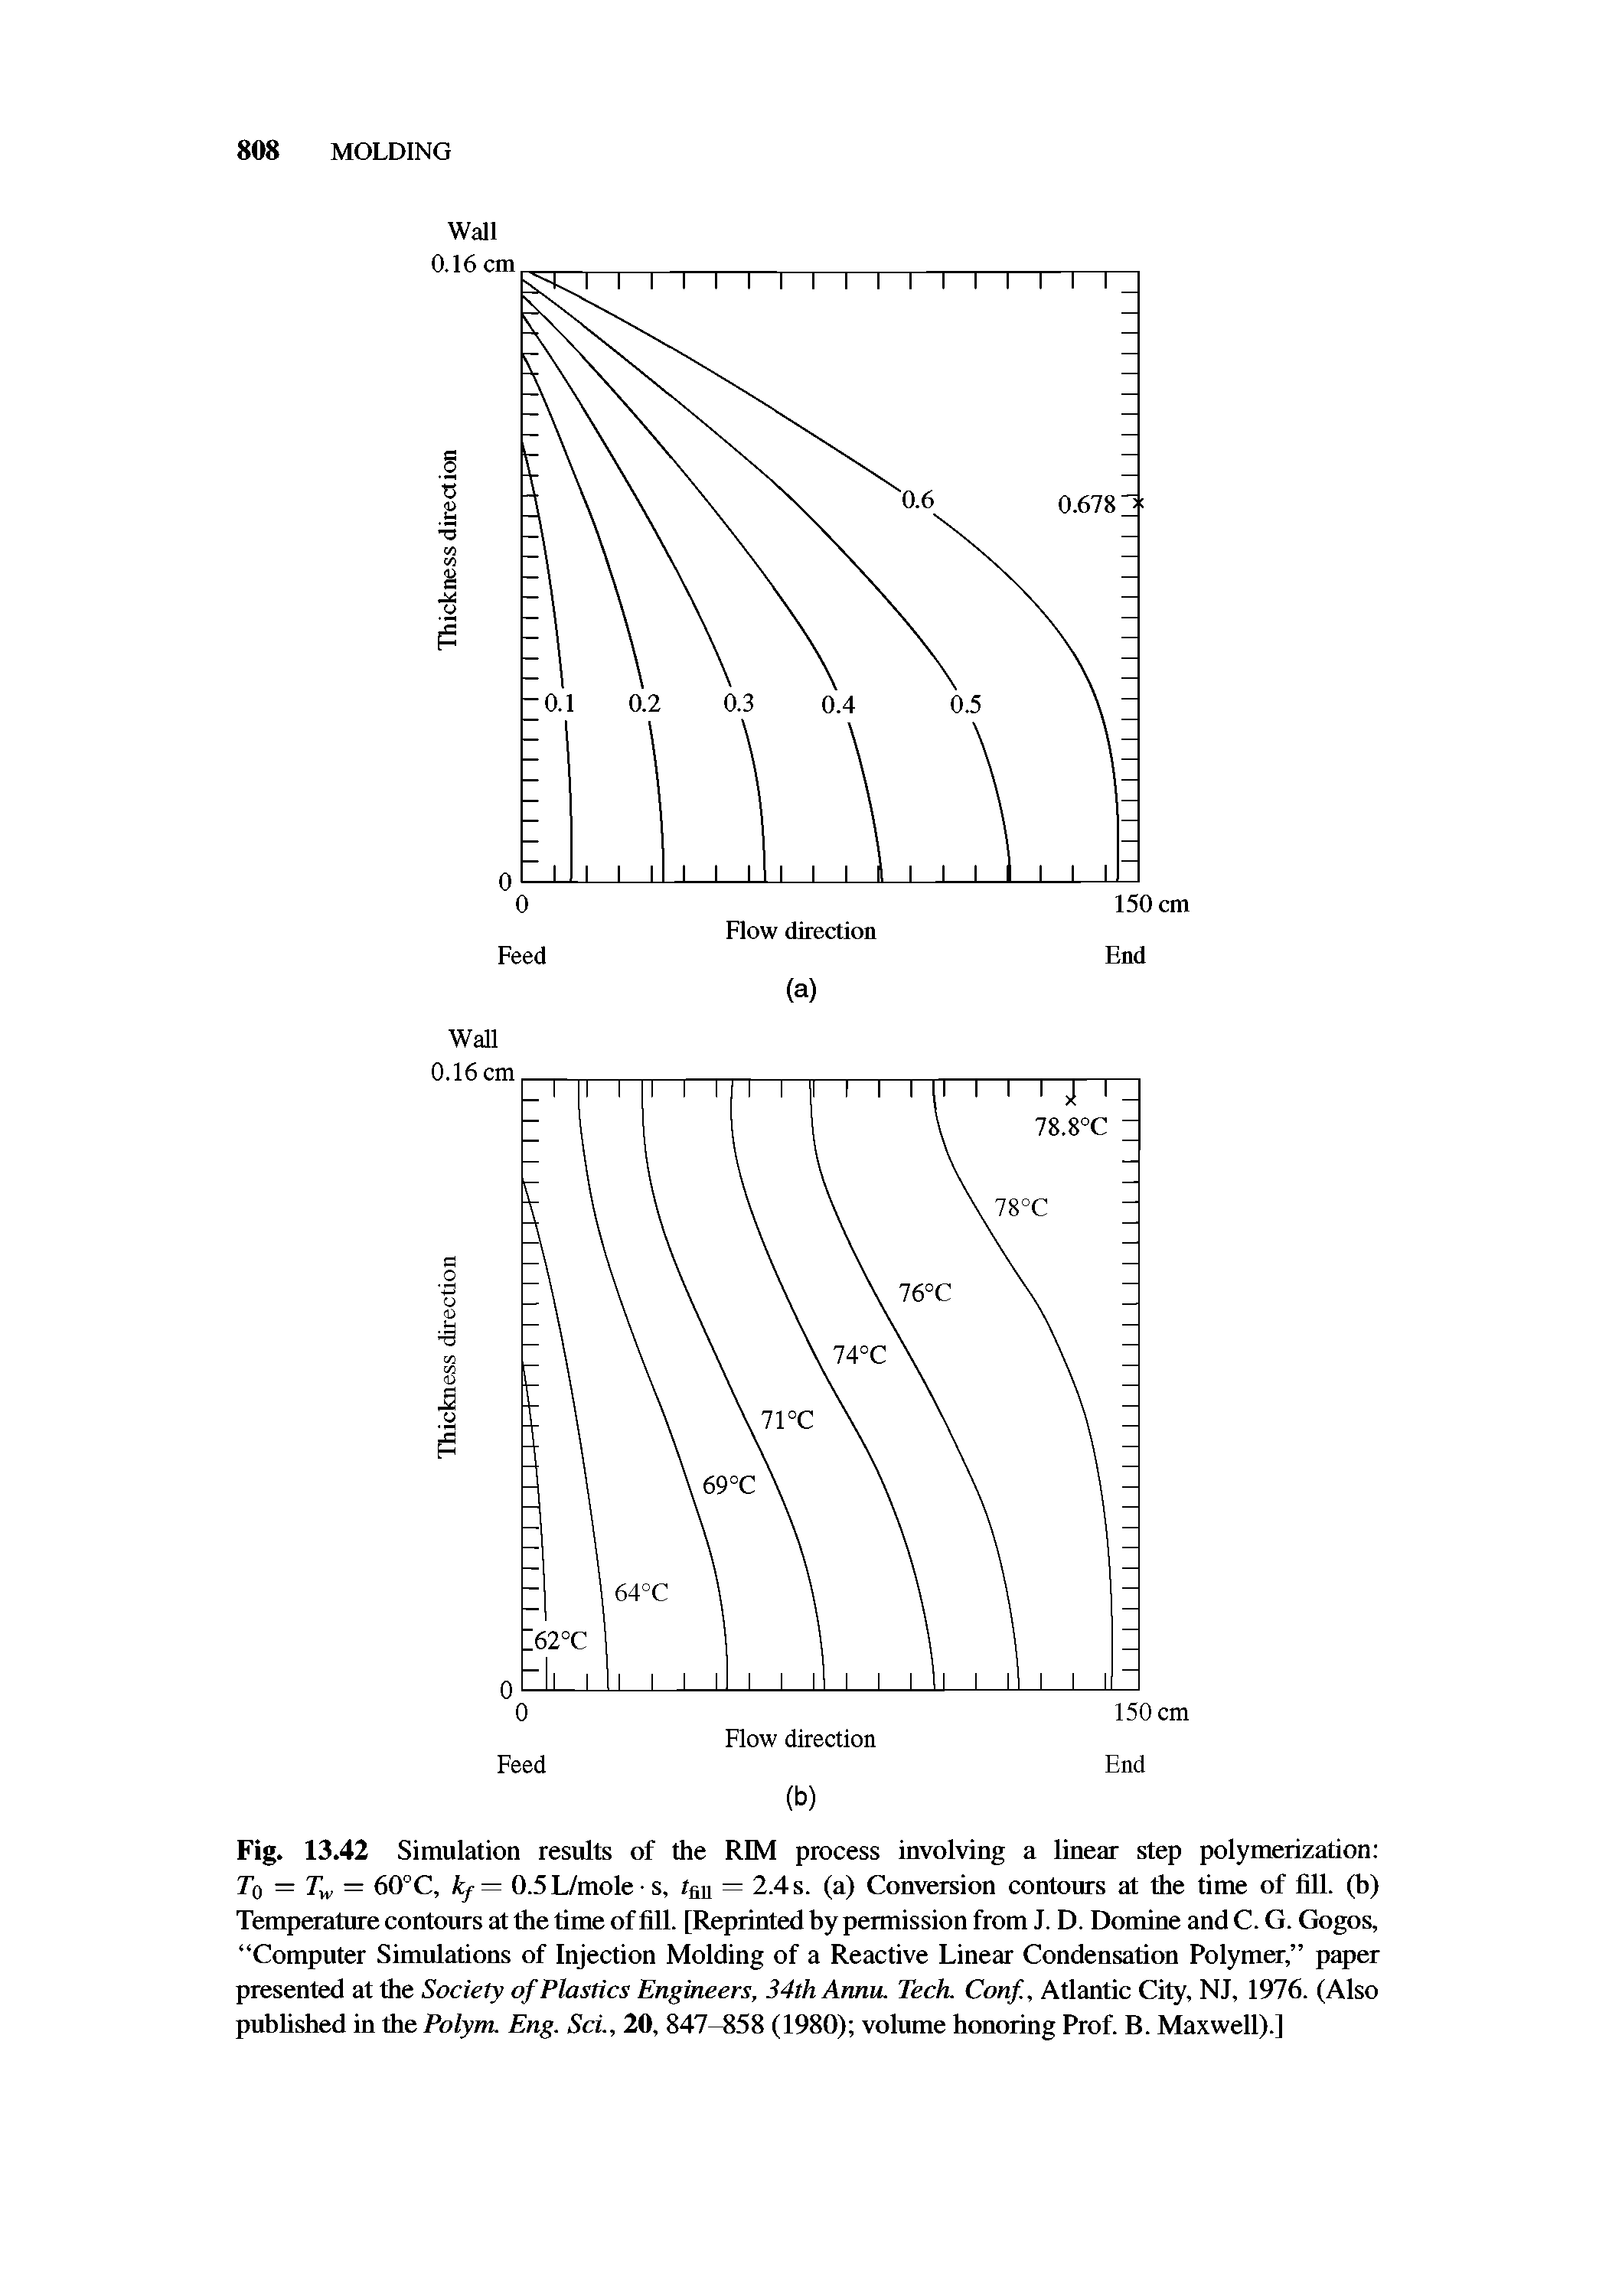 Fig. 13.42 Simulation results of the RIM process involving a linear step polymerization T0 = Tw = 60°C, kf— 0.5L/moles, t(lii = 2.4 s. (a) Conversion contours at the time of fill, (h) Temperature contours at the time of fill. [Reprinted hy permission from J. D. Domine and C. G. Gogos, Computer Simulations of Injection Molding of a Reactive Linear Condensation Polymer, paper presented at the Society of Plastics Engineers, 34th Armu. Tech. Conf, Atlantic City, NJ, 1976. (Also published in the Polym. Eng. Sci., 20, 847-858 (1980) volume honoring Prof. B. Maxwell).]...